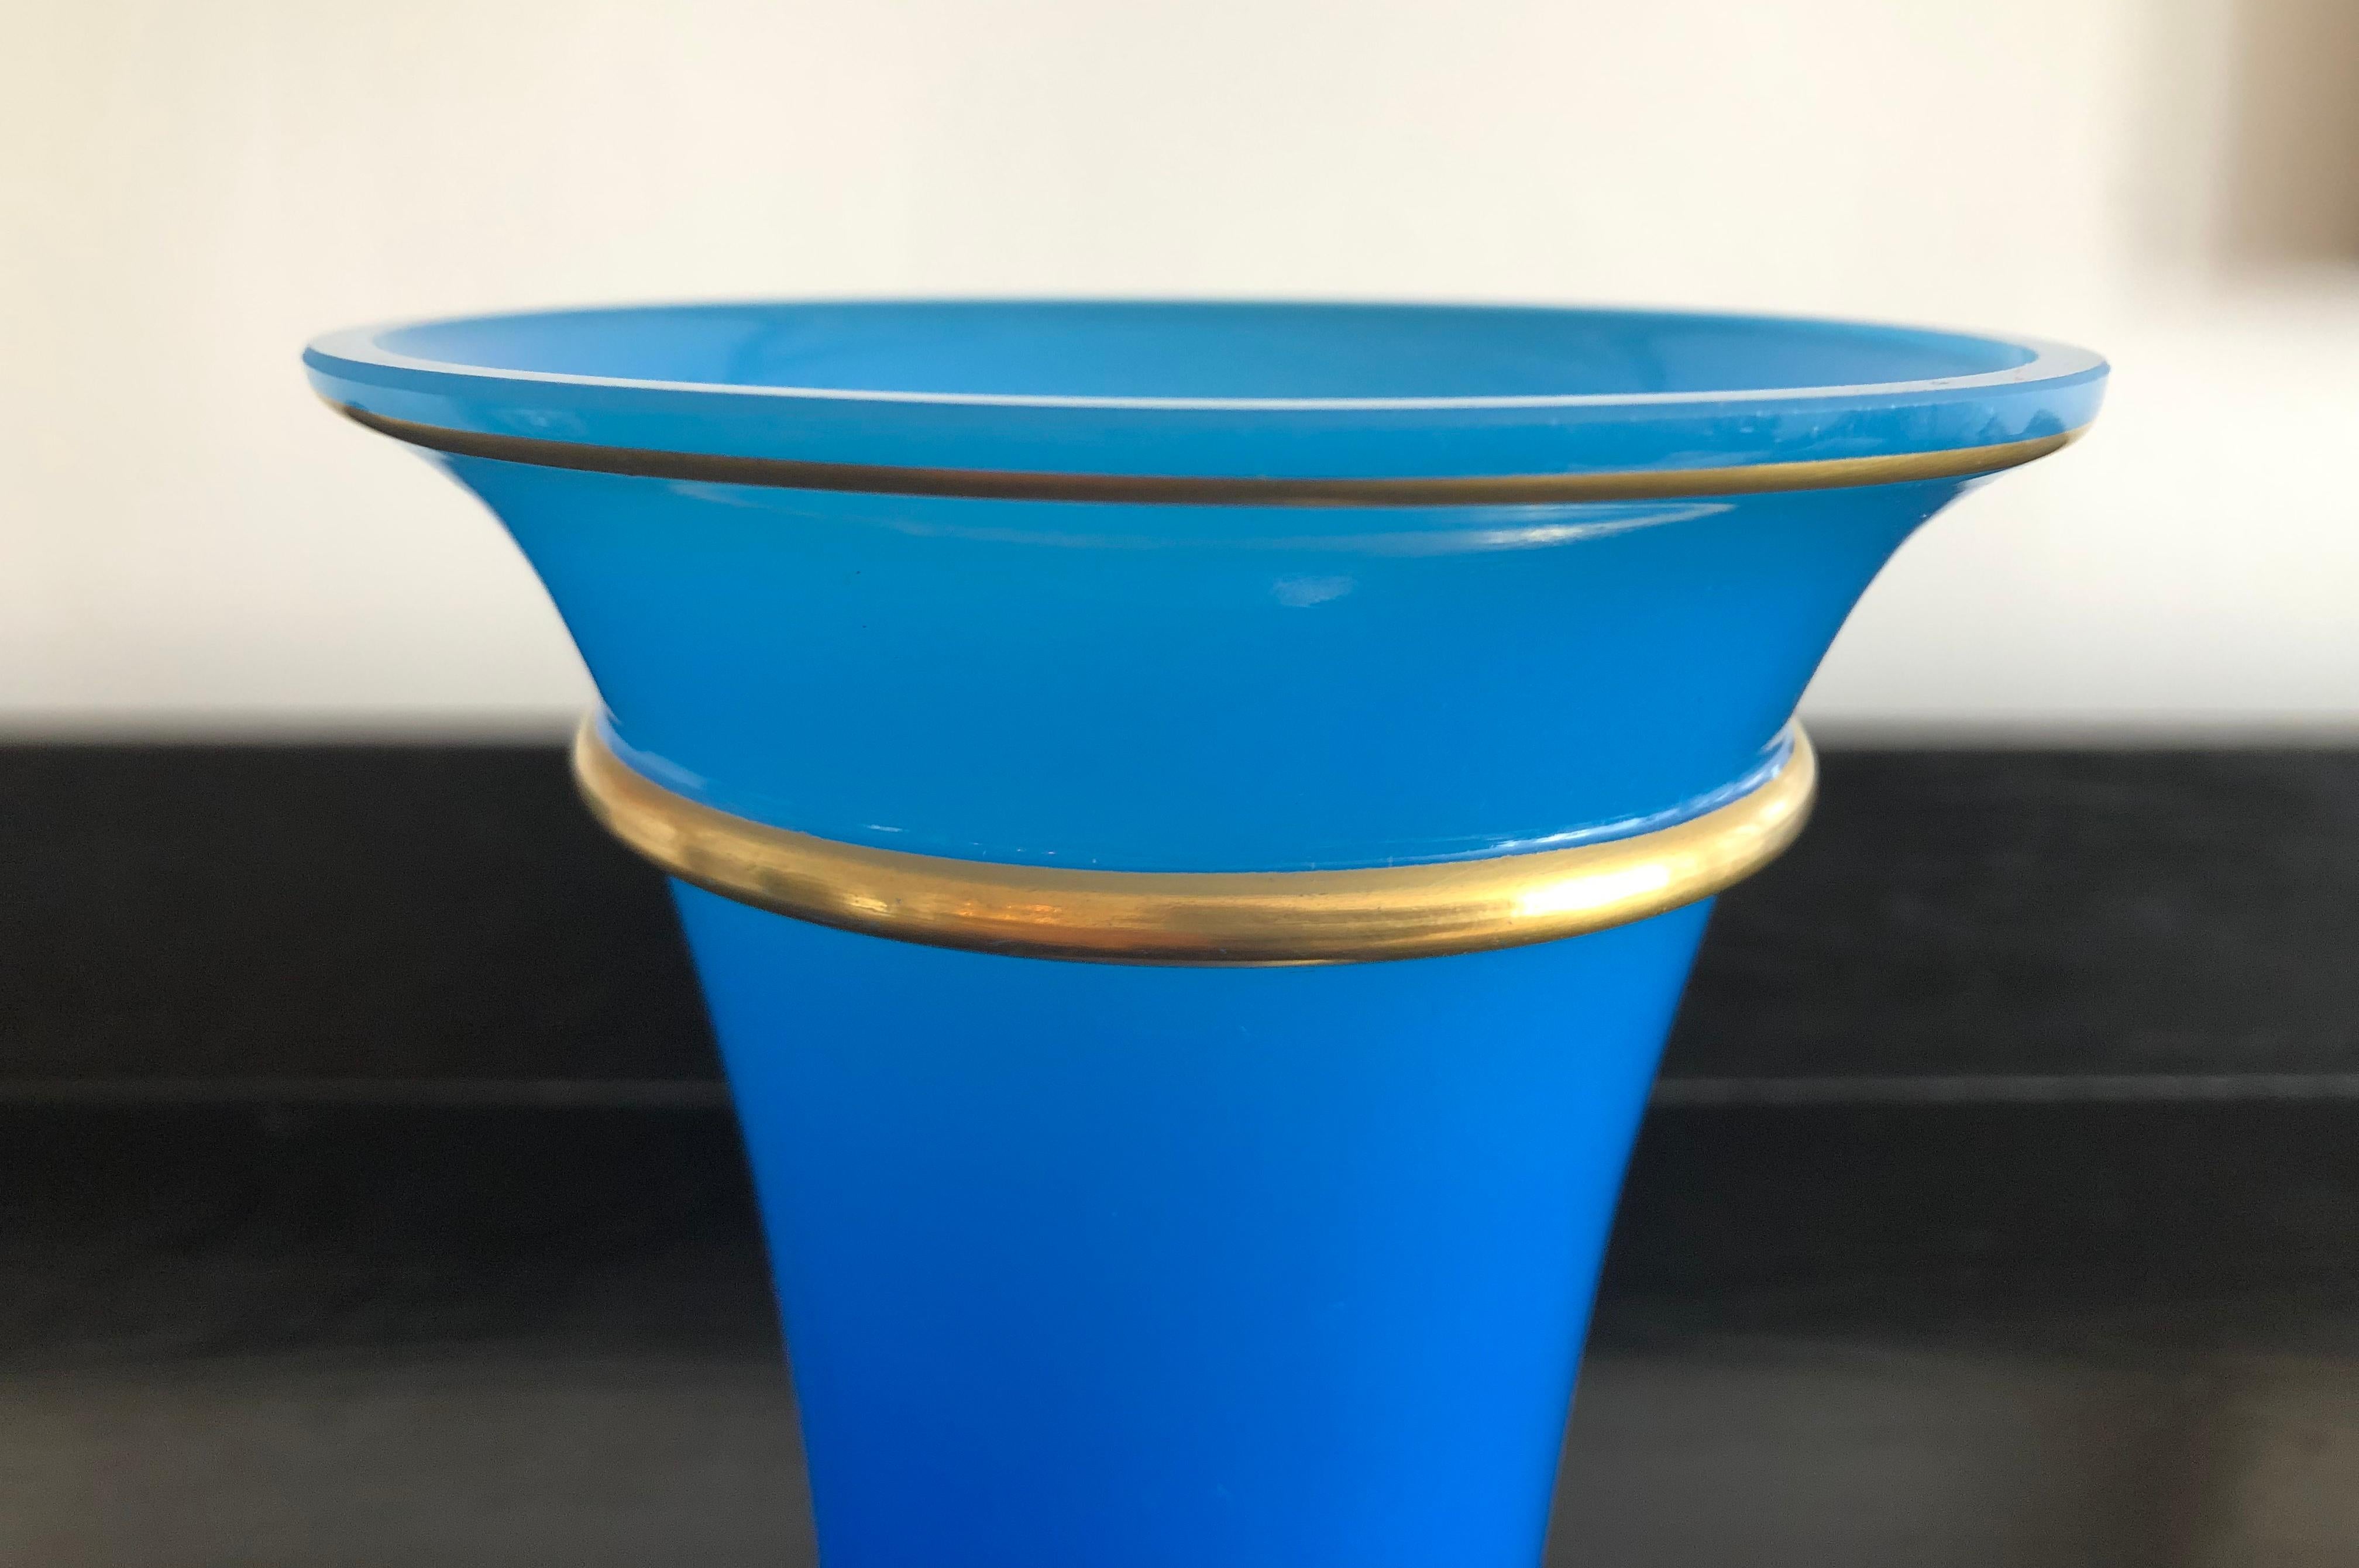 An antique French blue opaline glass vase of cylindrical form with flared rim with gilded striped band decoration. Rich, vibrant blue color and good weight. Excellent condition. 